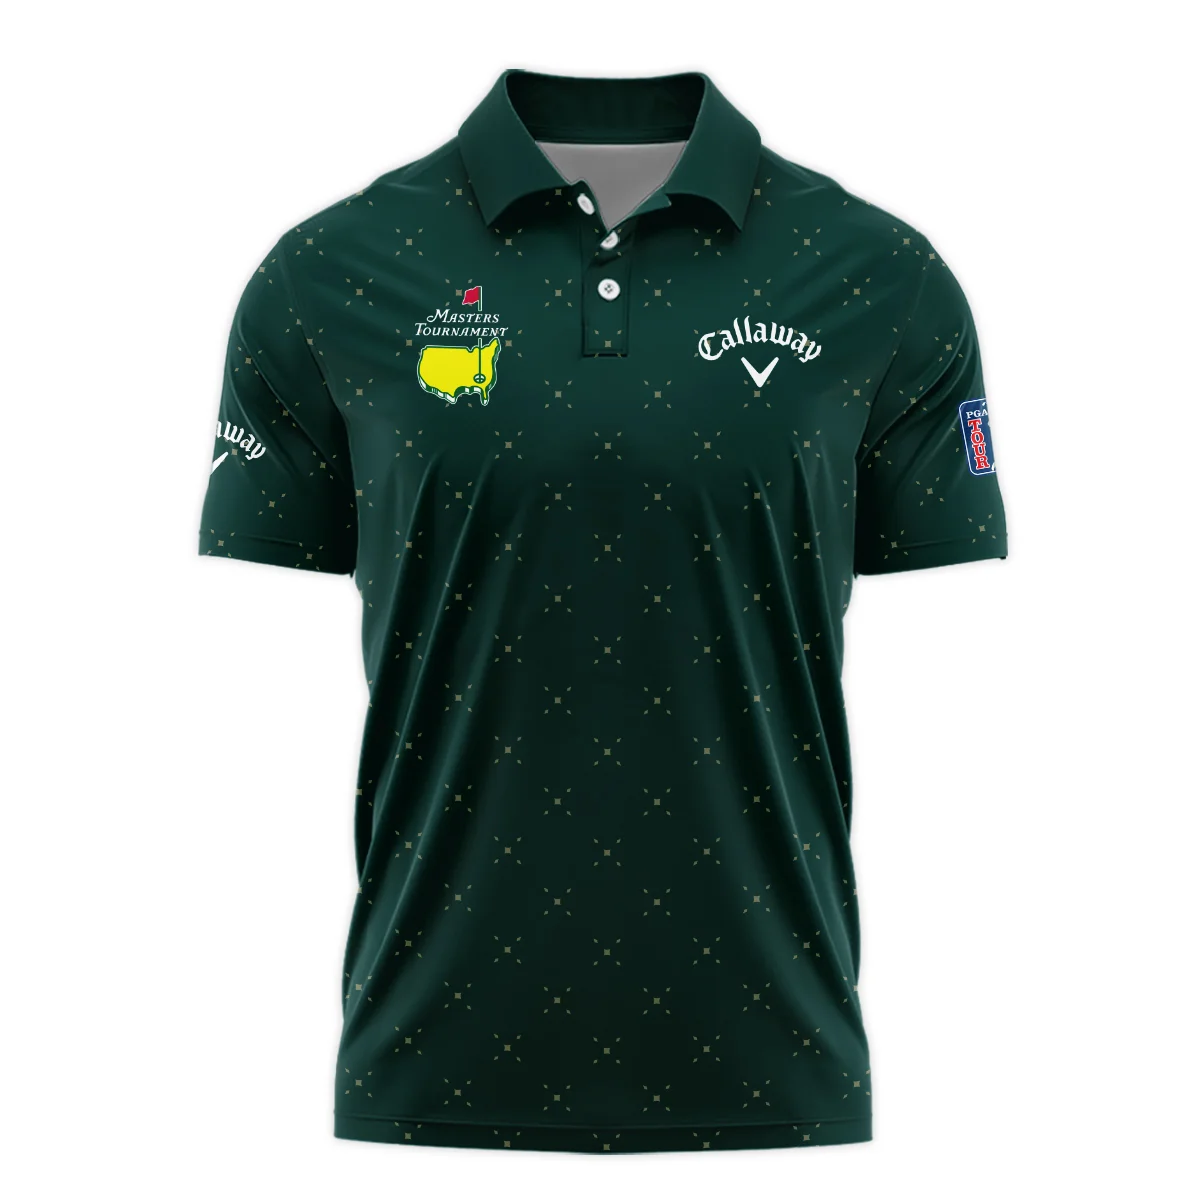 Diamond Shapes With Geometric Pattern Masters Tournament Callaway Polo Shirt Style Classic Polo Shirt For Men